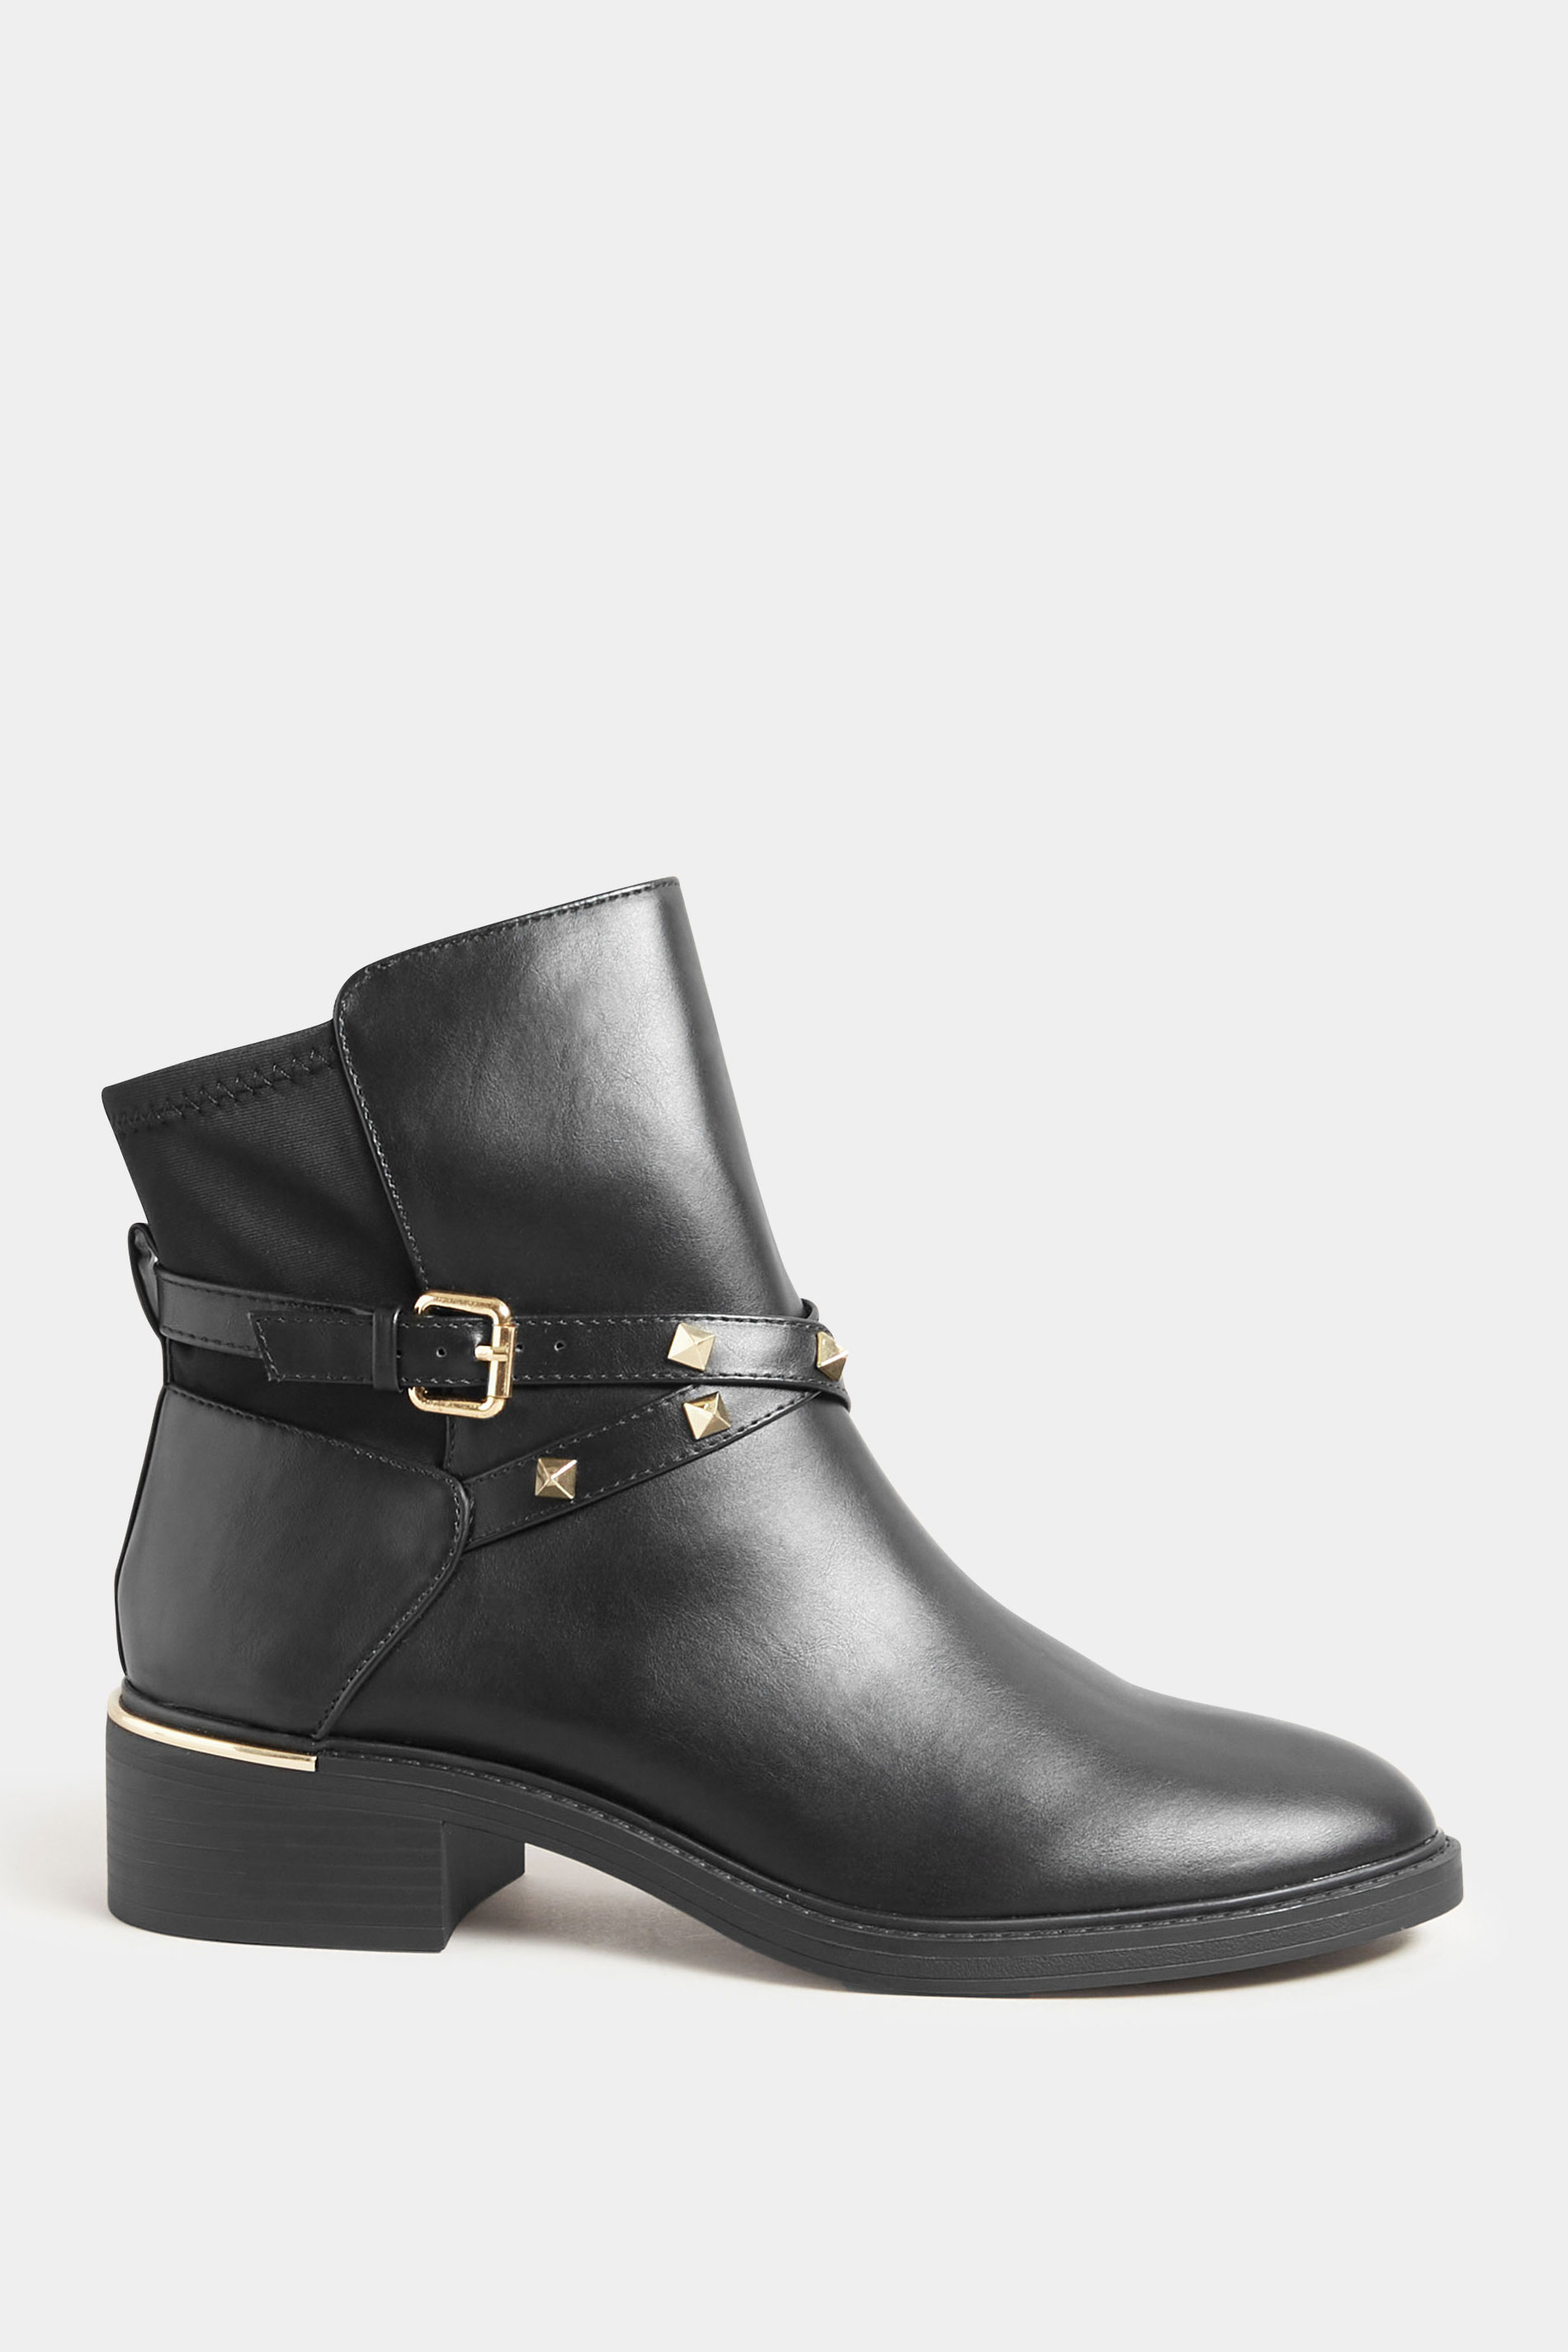 LTS Black & Gold Hardware Chelsea Boots In Standard Fit | Long Tall Sally 3